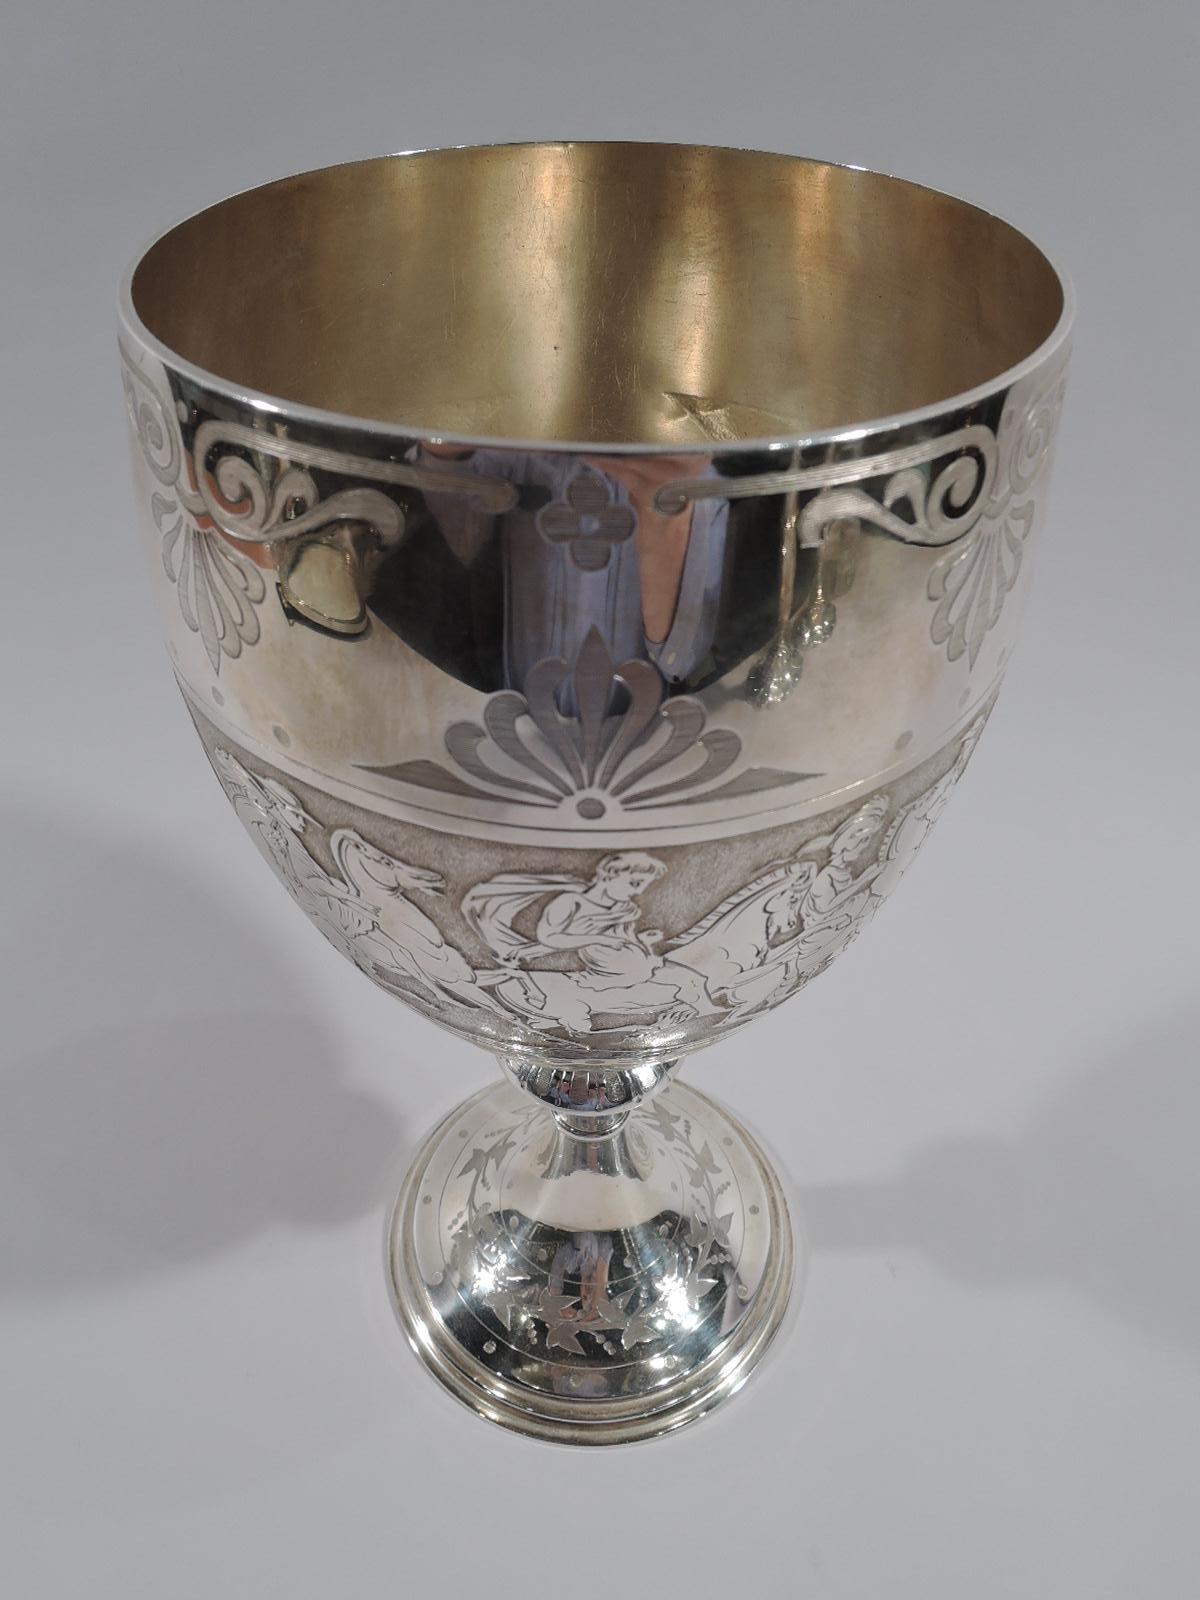 Victorian classical sterling silver goblet. Made by Barnard & Sons in London in 1872. Oval bowl on flanged and knopped shaft flowing into stepped and raised foot. Acid-etched equestrian frieze between stylized palmette borders. Circular cartouche